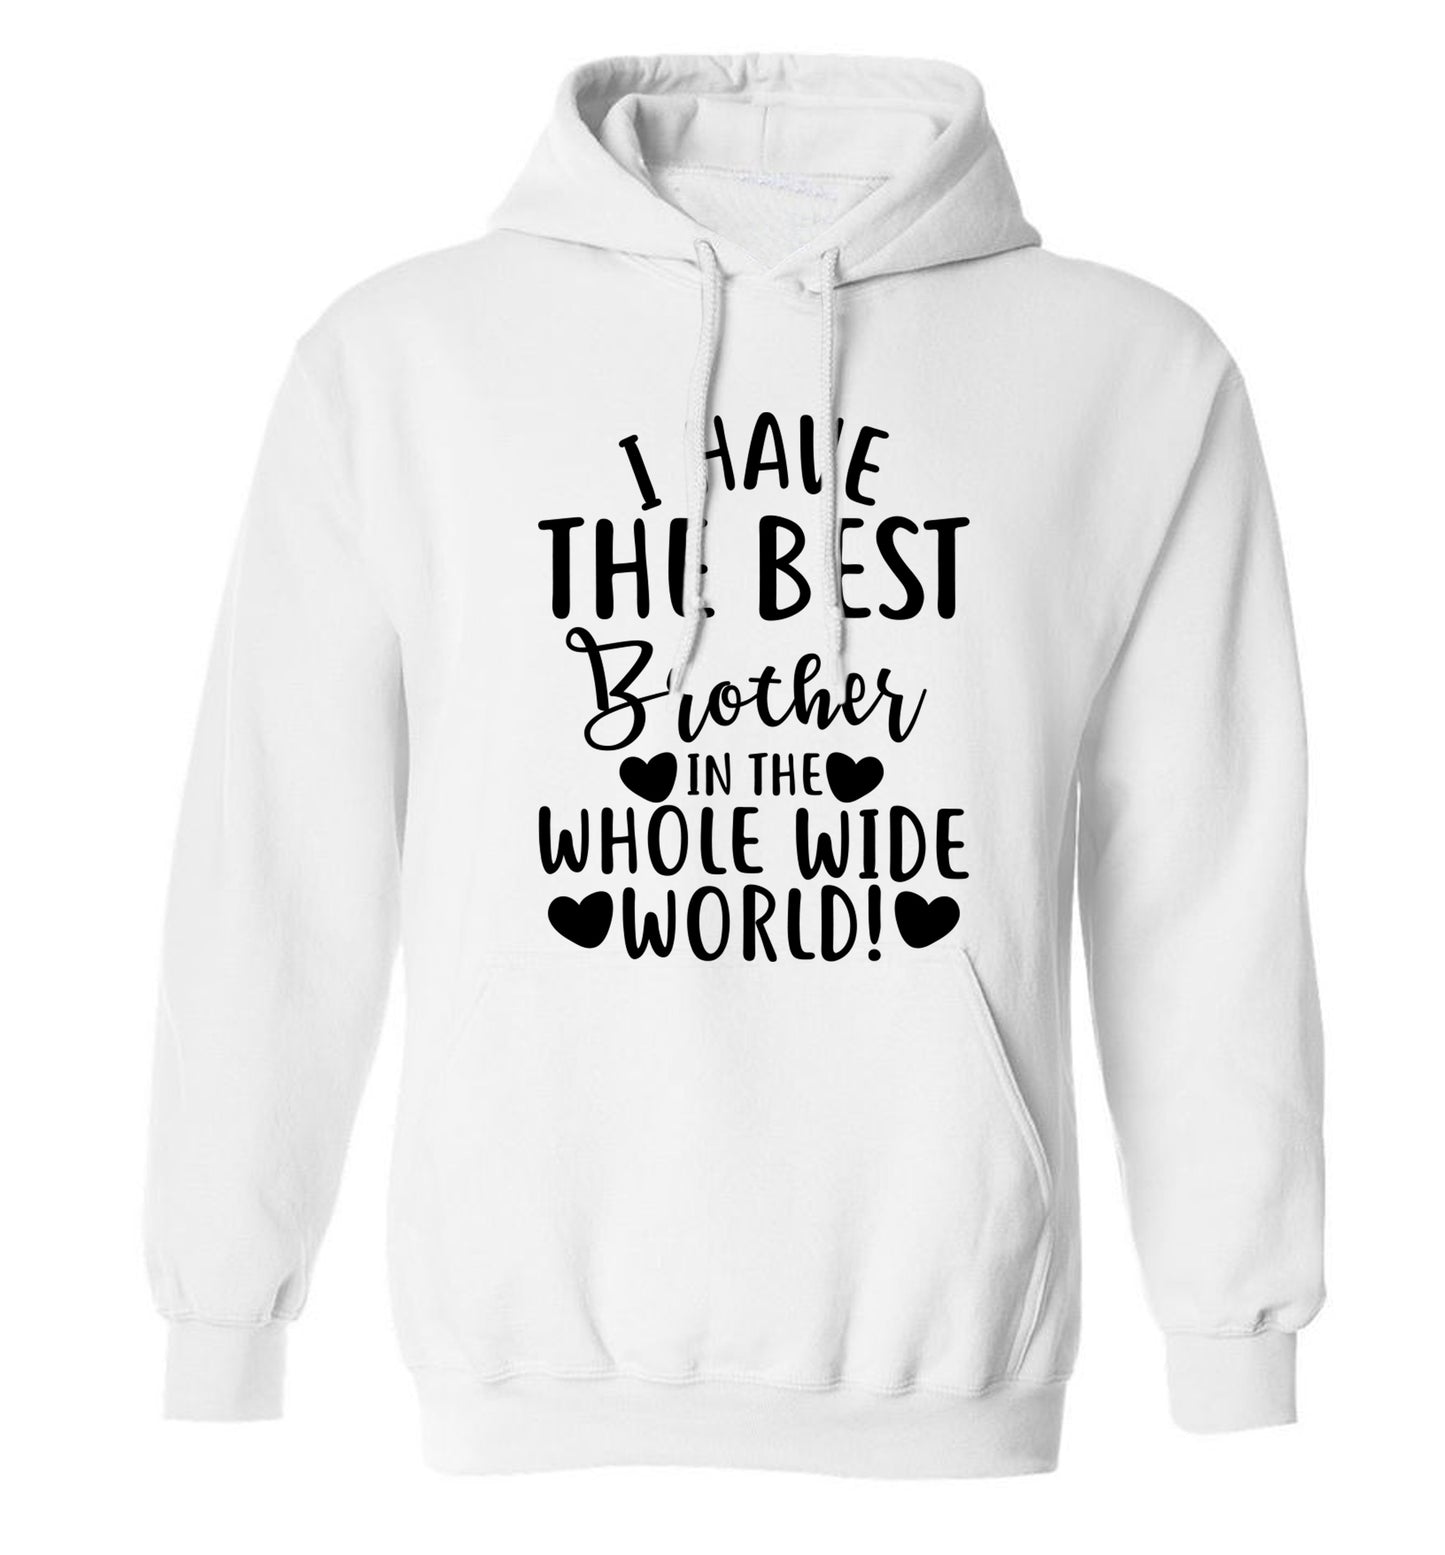 I have the best brother in the whole wide world! adults unisex white hoodie 2XL